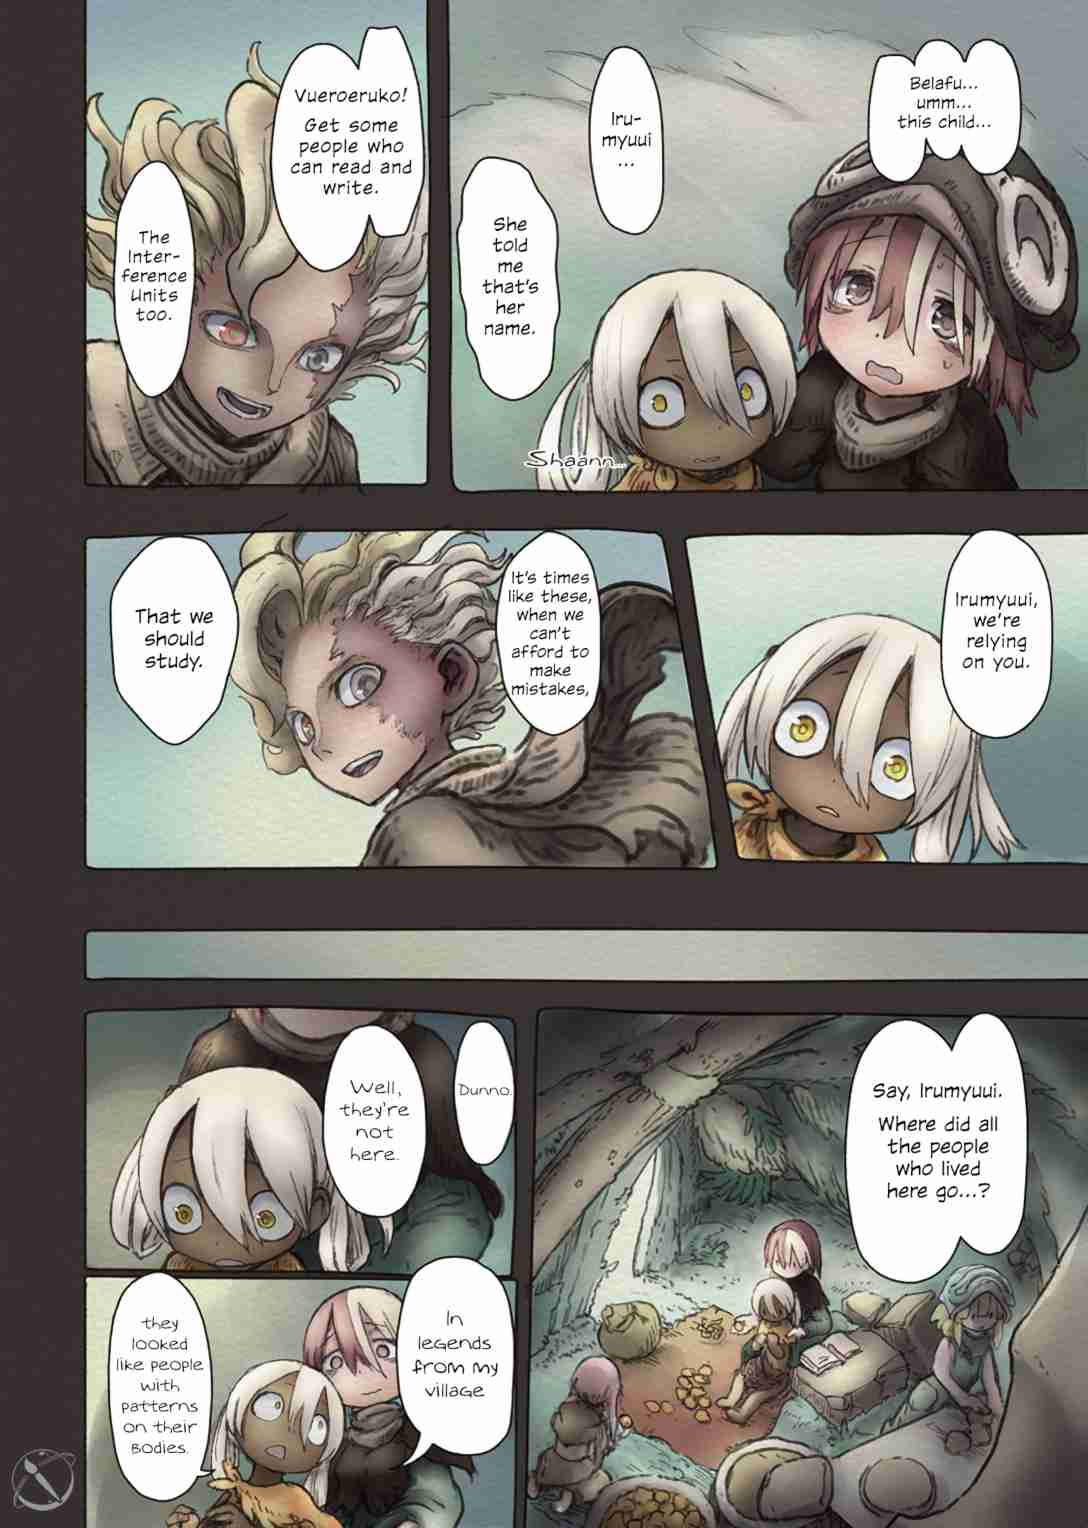 Made in Abyss (Fan Colored) Vol. 8 Ch. 49 The Golden City [Colored]